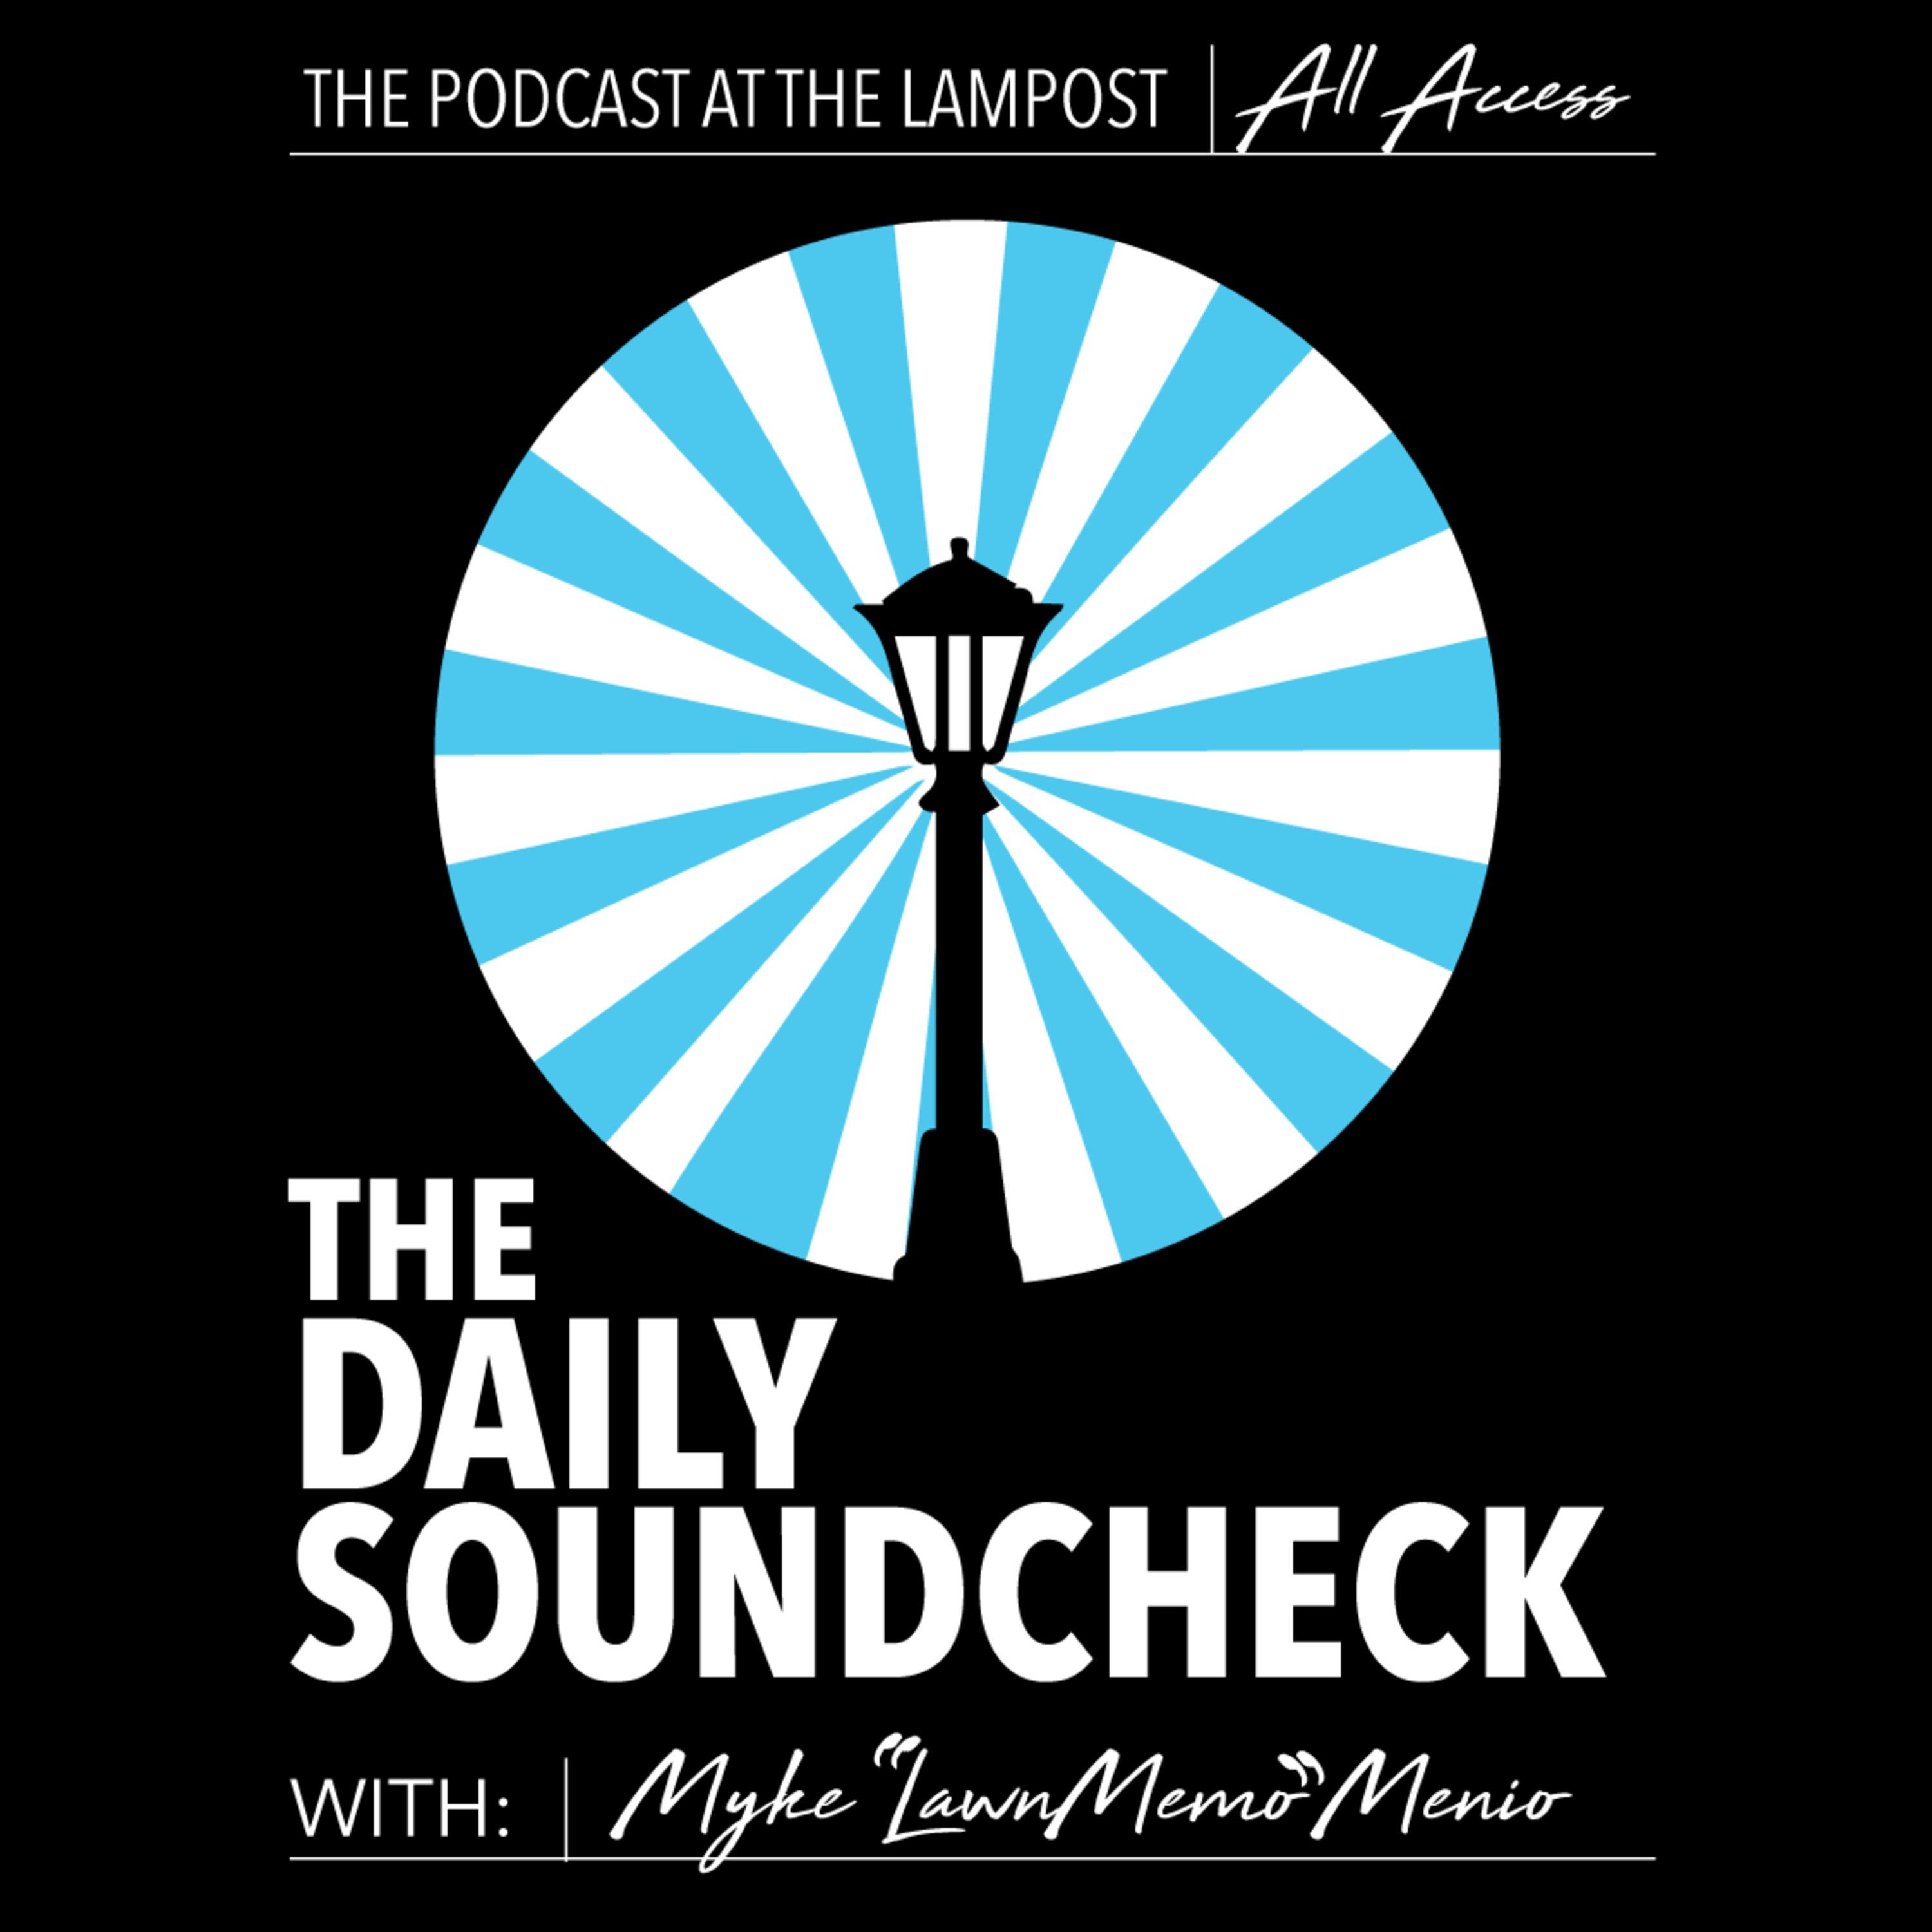 The Daily Soundcheck Ep 67-12/07/1997 Ervin J. Nutter Center, Wright State University, Dayton, OH )("Boogie>Funky Bitch>I'll Be Around>Apu>Demand>MMGAMOIO>Stallion Pt. 3,>Rover>LxL")